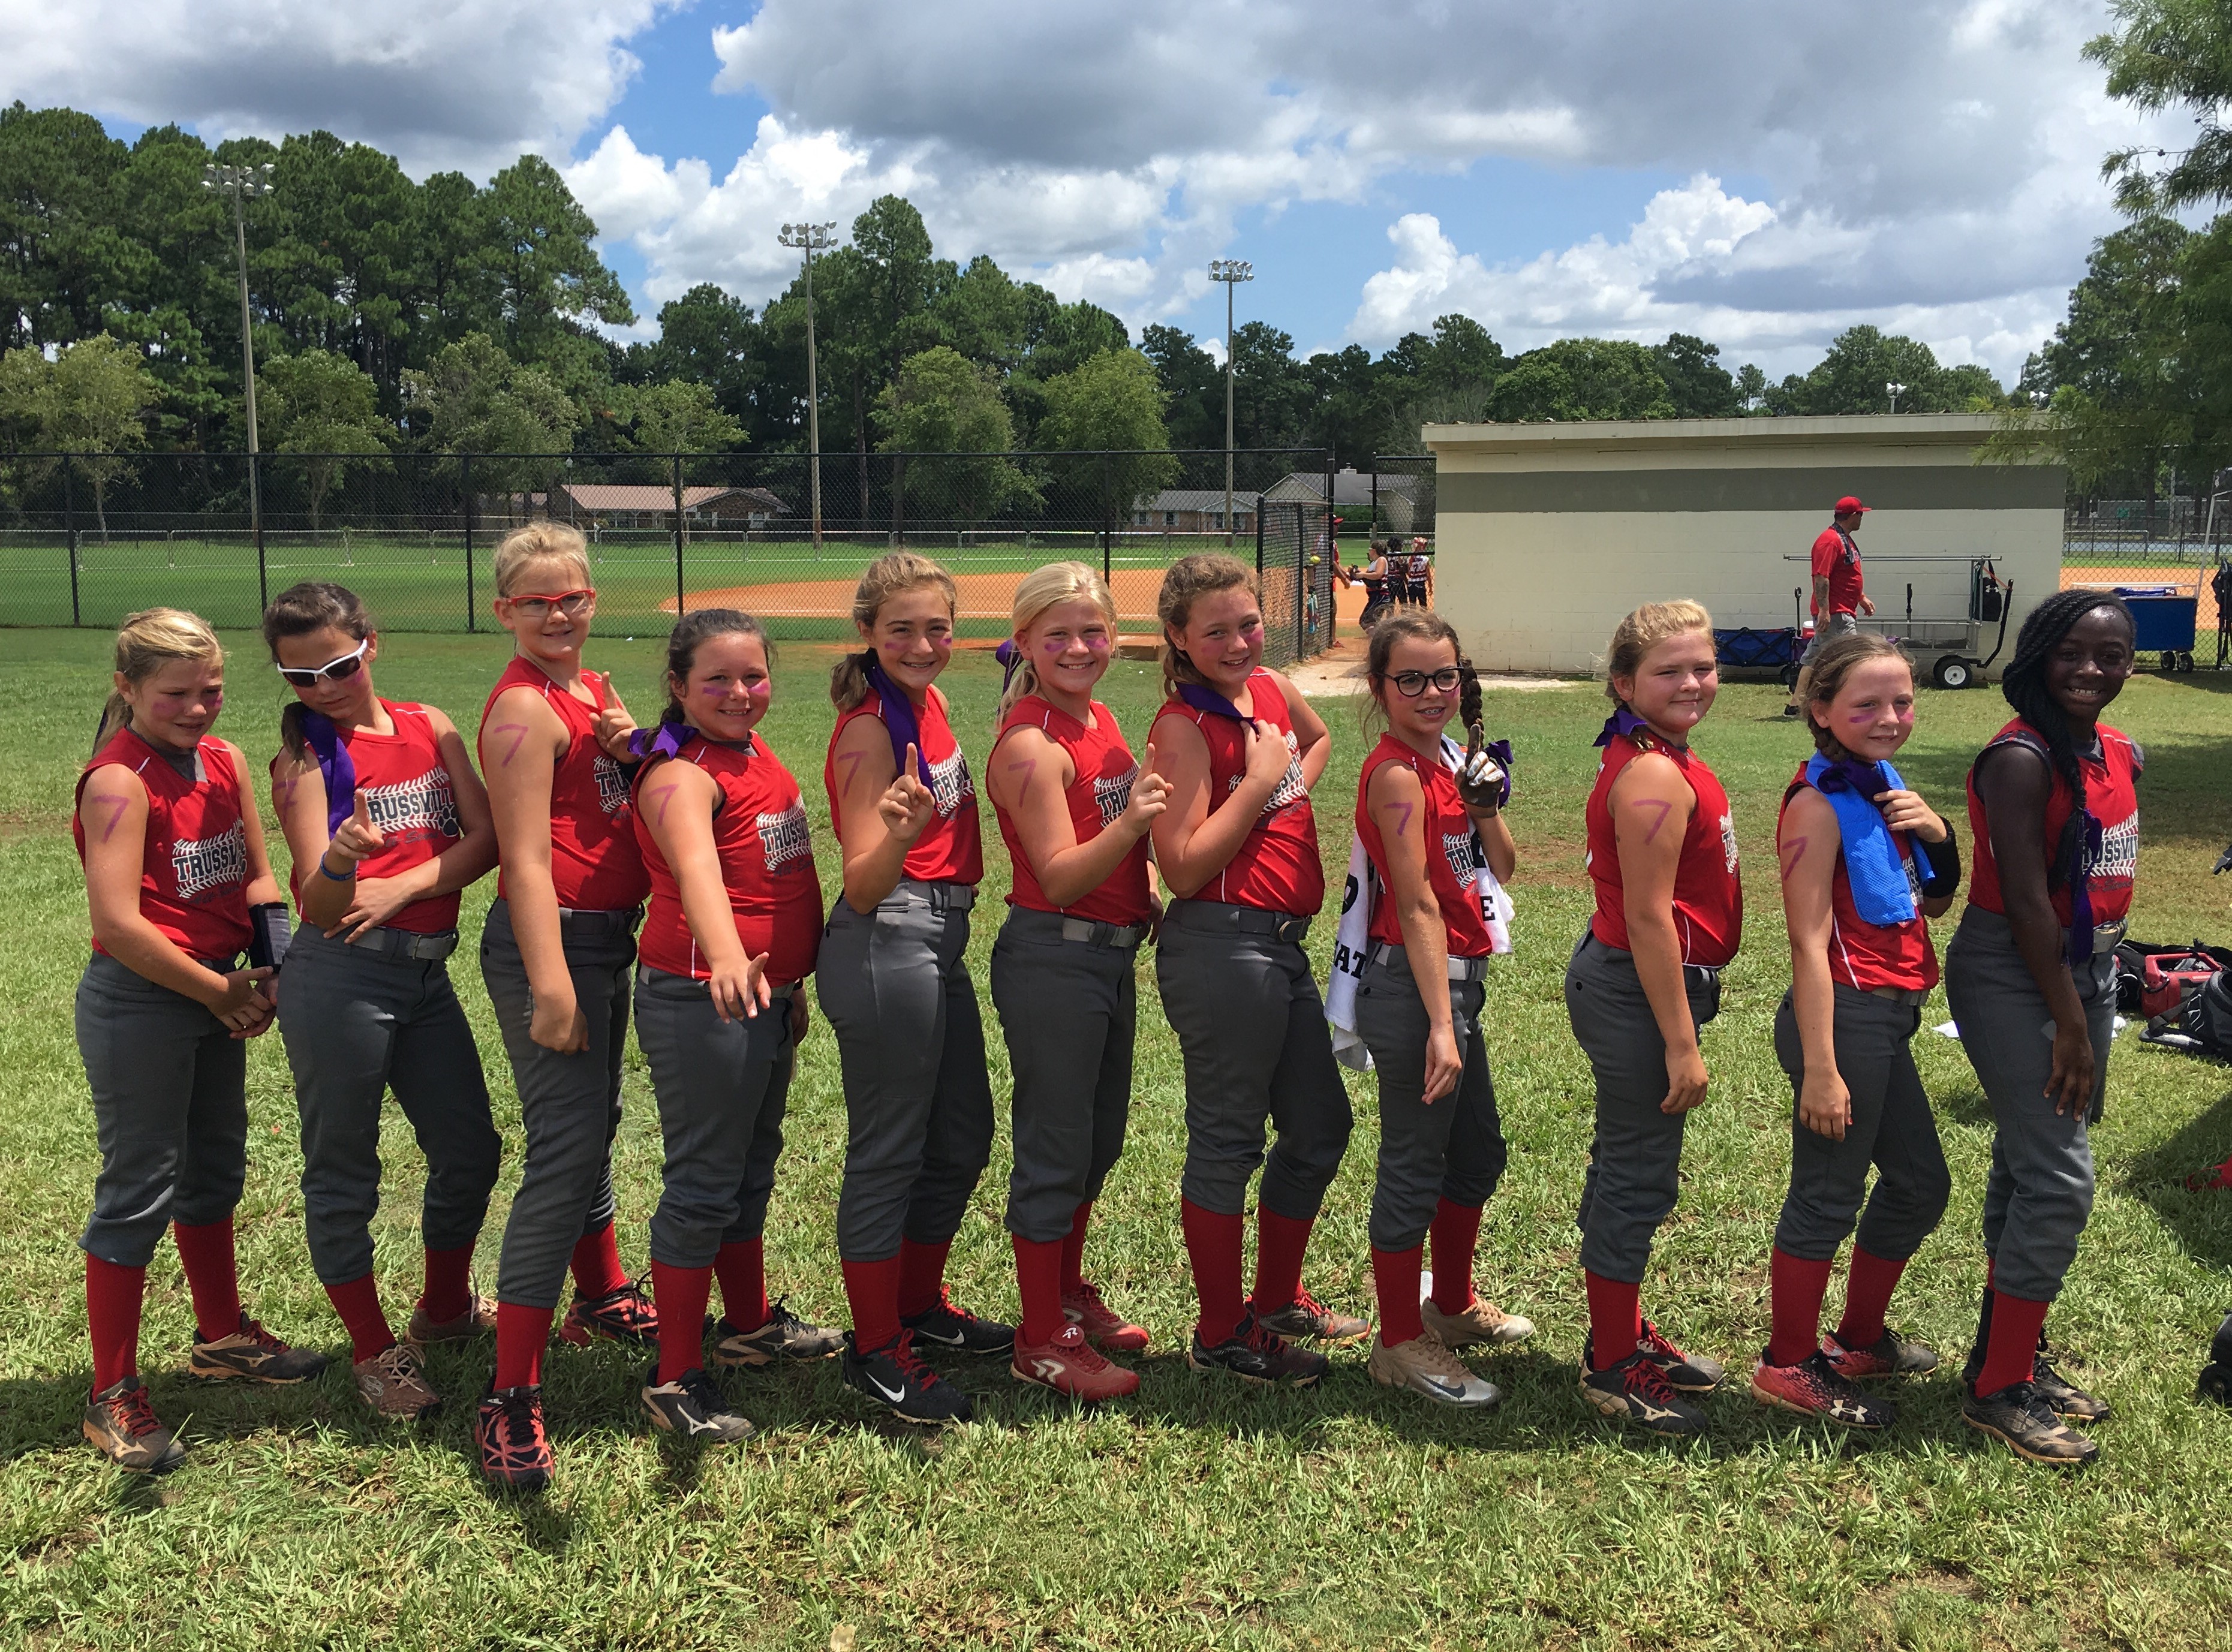 Trussville rec league team finishes No. 2 in U.S., No. 1 in power rankings